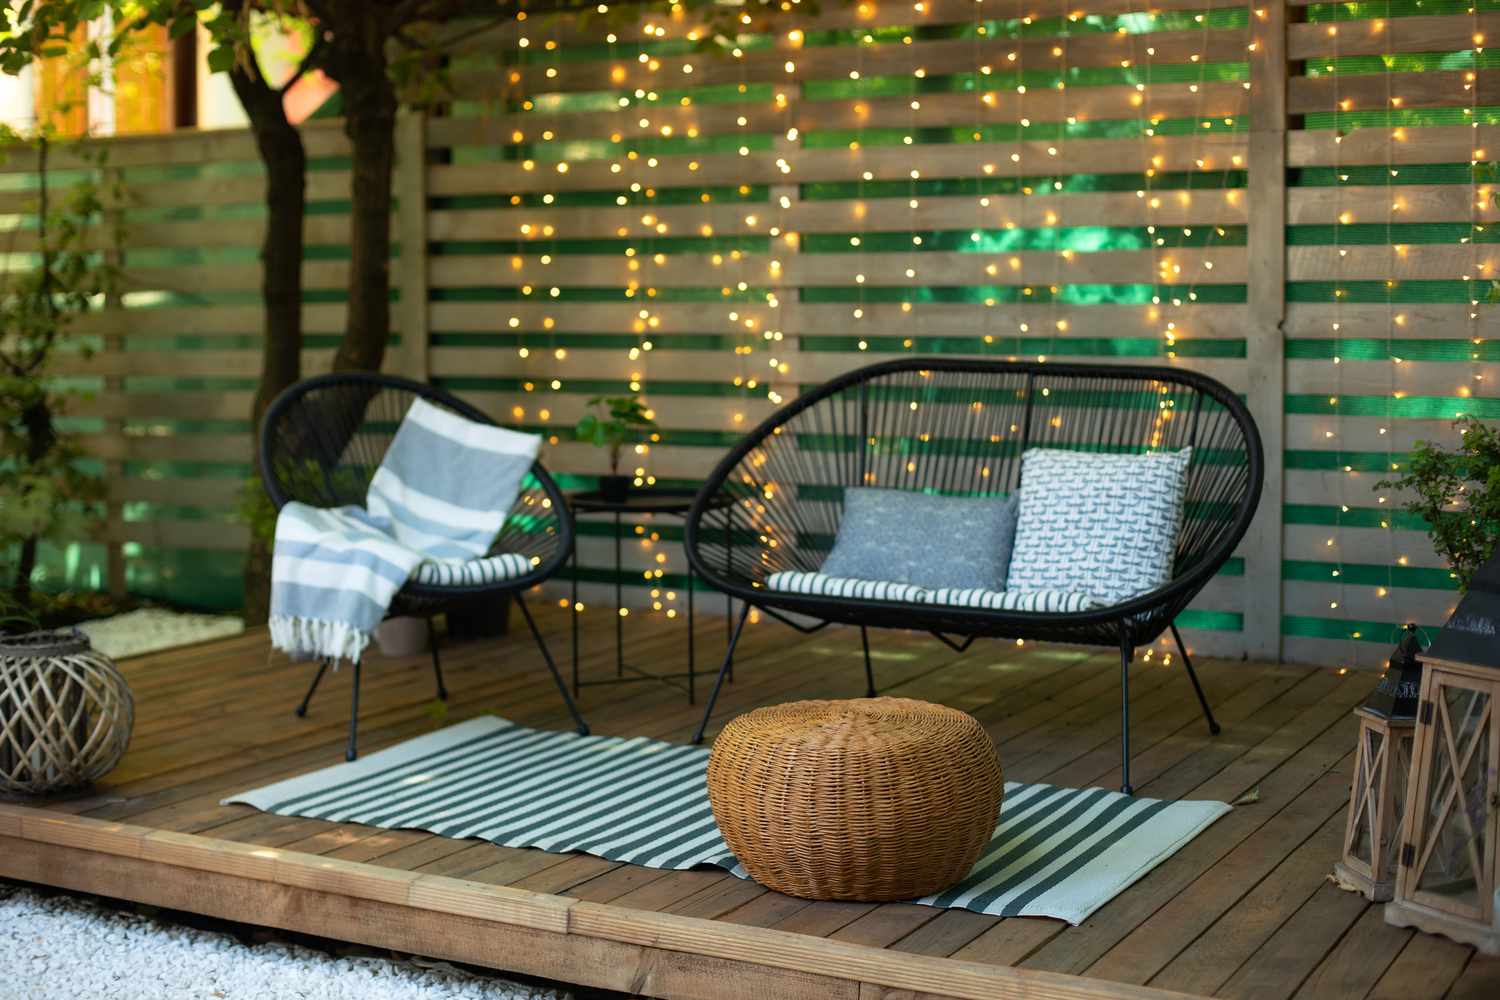 Privacy fence with string lights